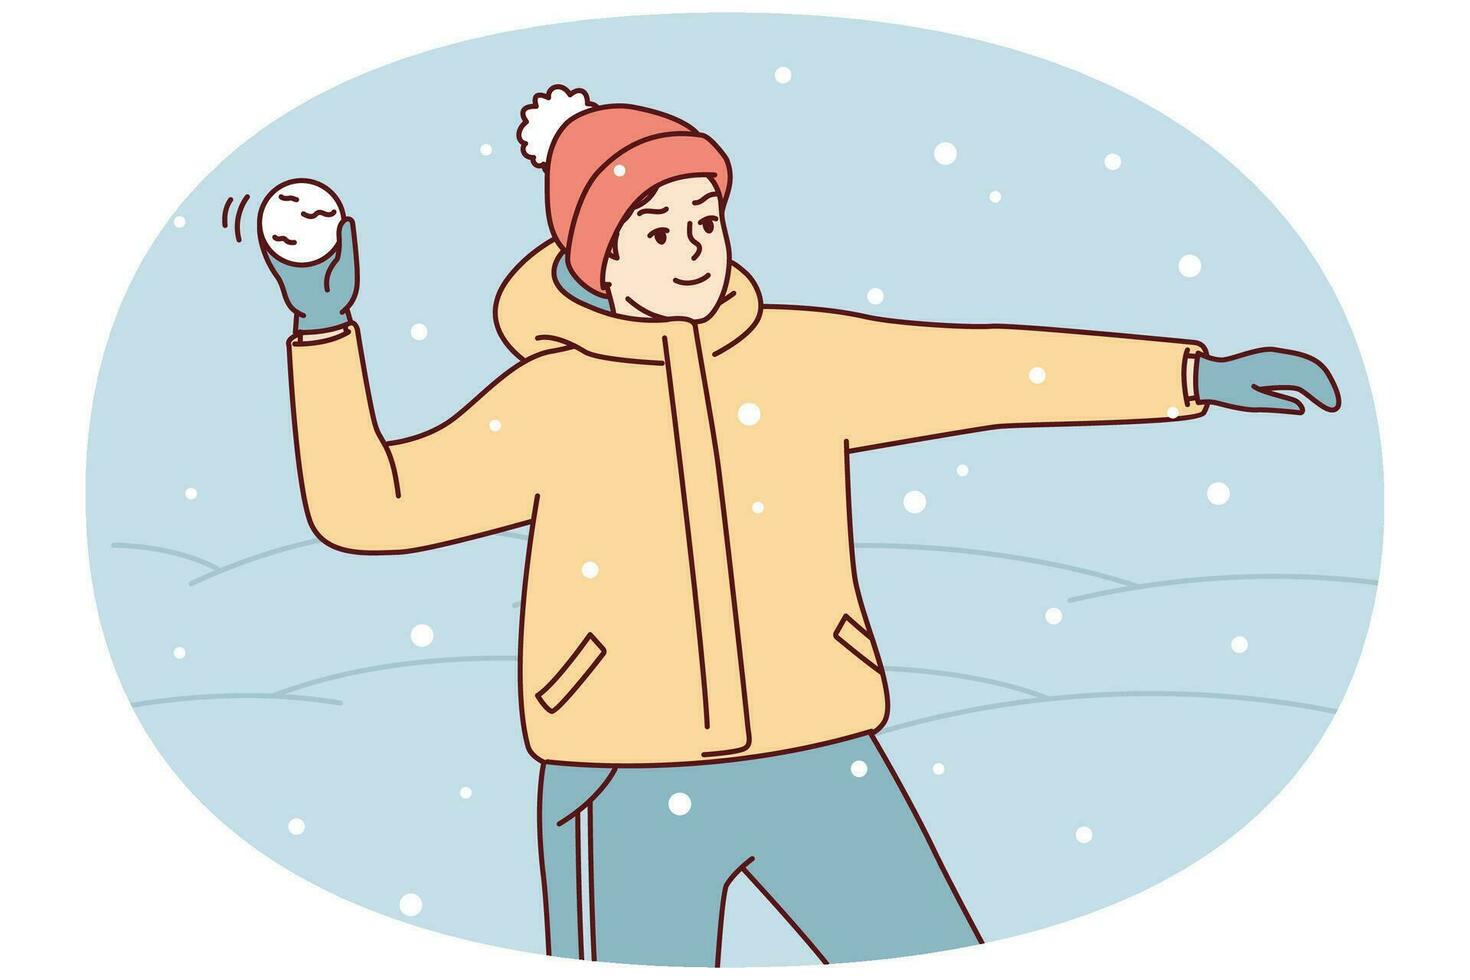 Teenage boy in winter clothes and hat plays snowballs throws snow at friends. Vector image